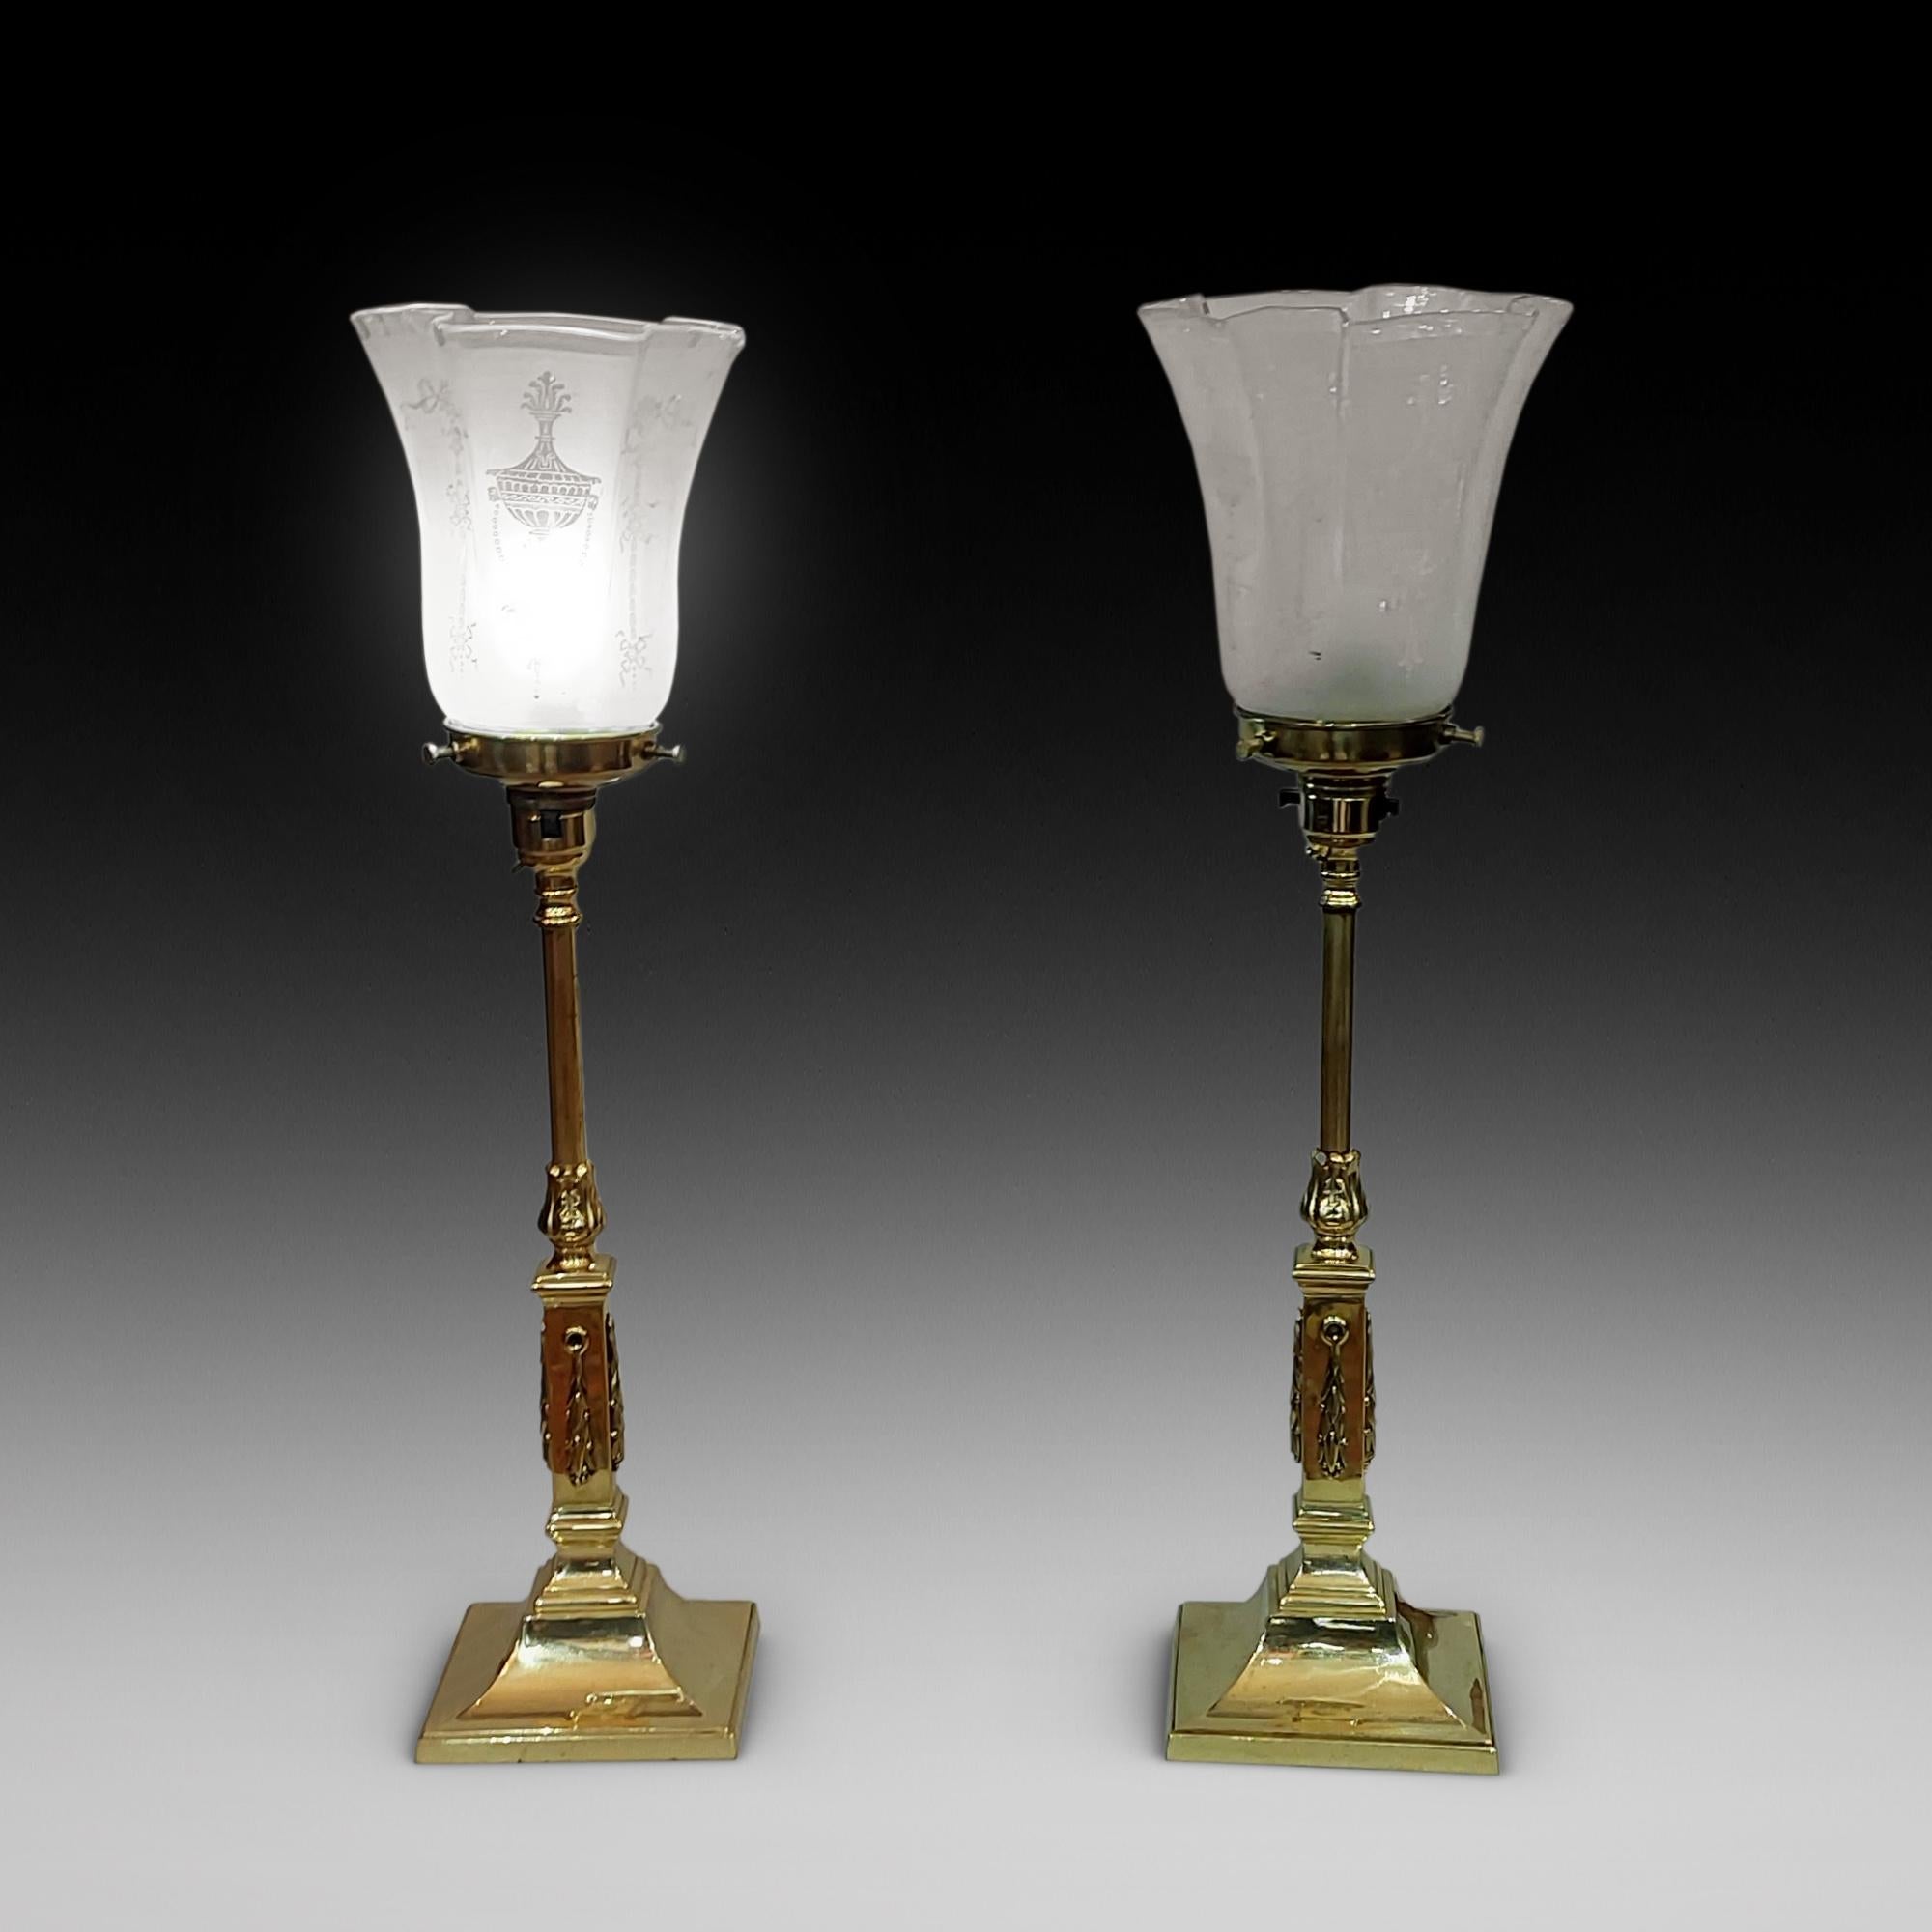 Pair of Edwardian Adam Revival Brass Table Lamps with Frosted Glass Shades - 5